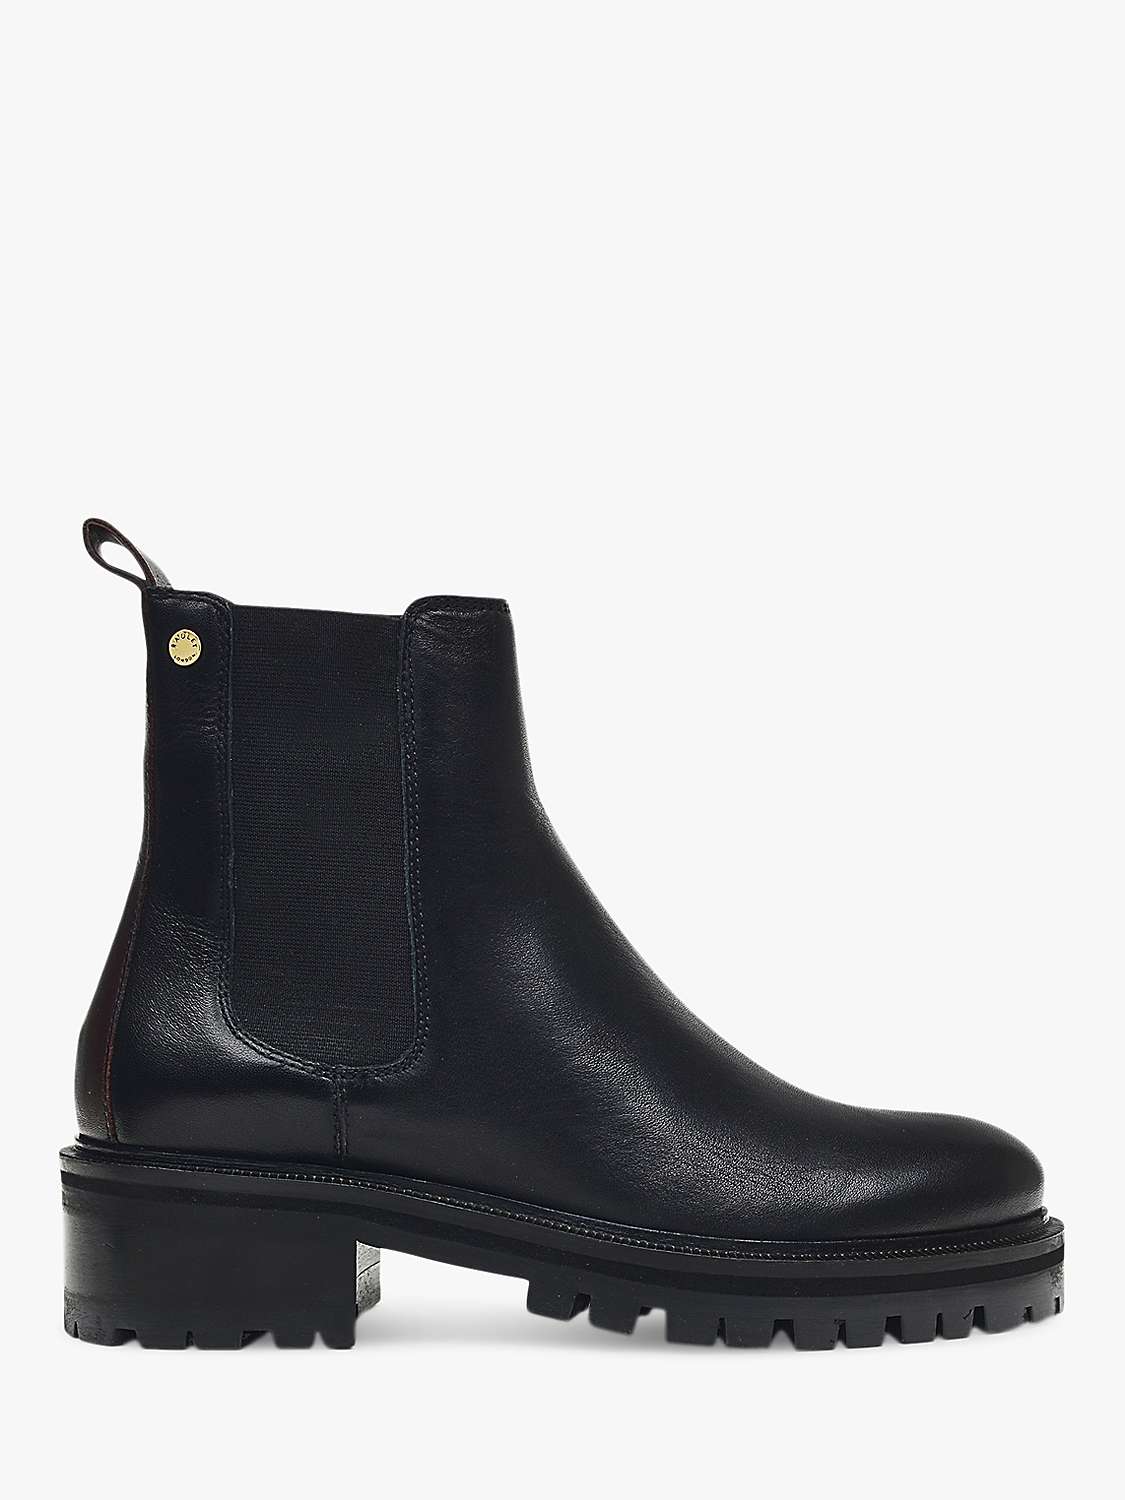 Buy Radley Keystone Crescent 2.0 Chunky Leather Chelsea Boots, Black Online at johnlewis.com